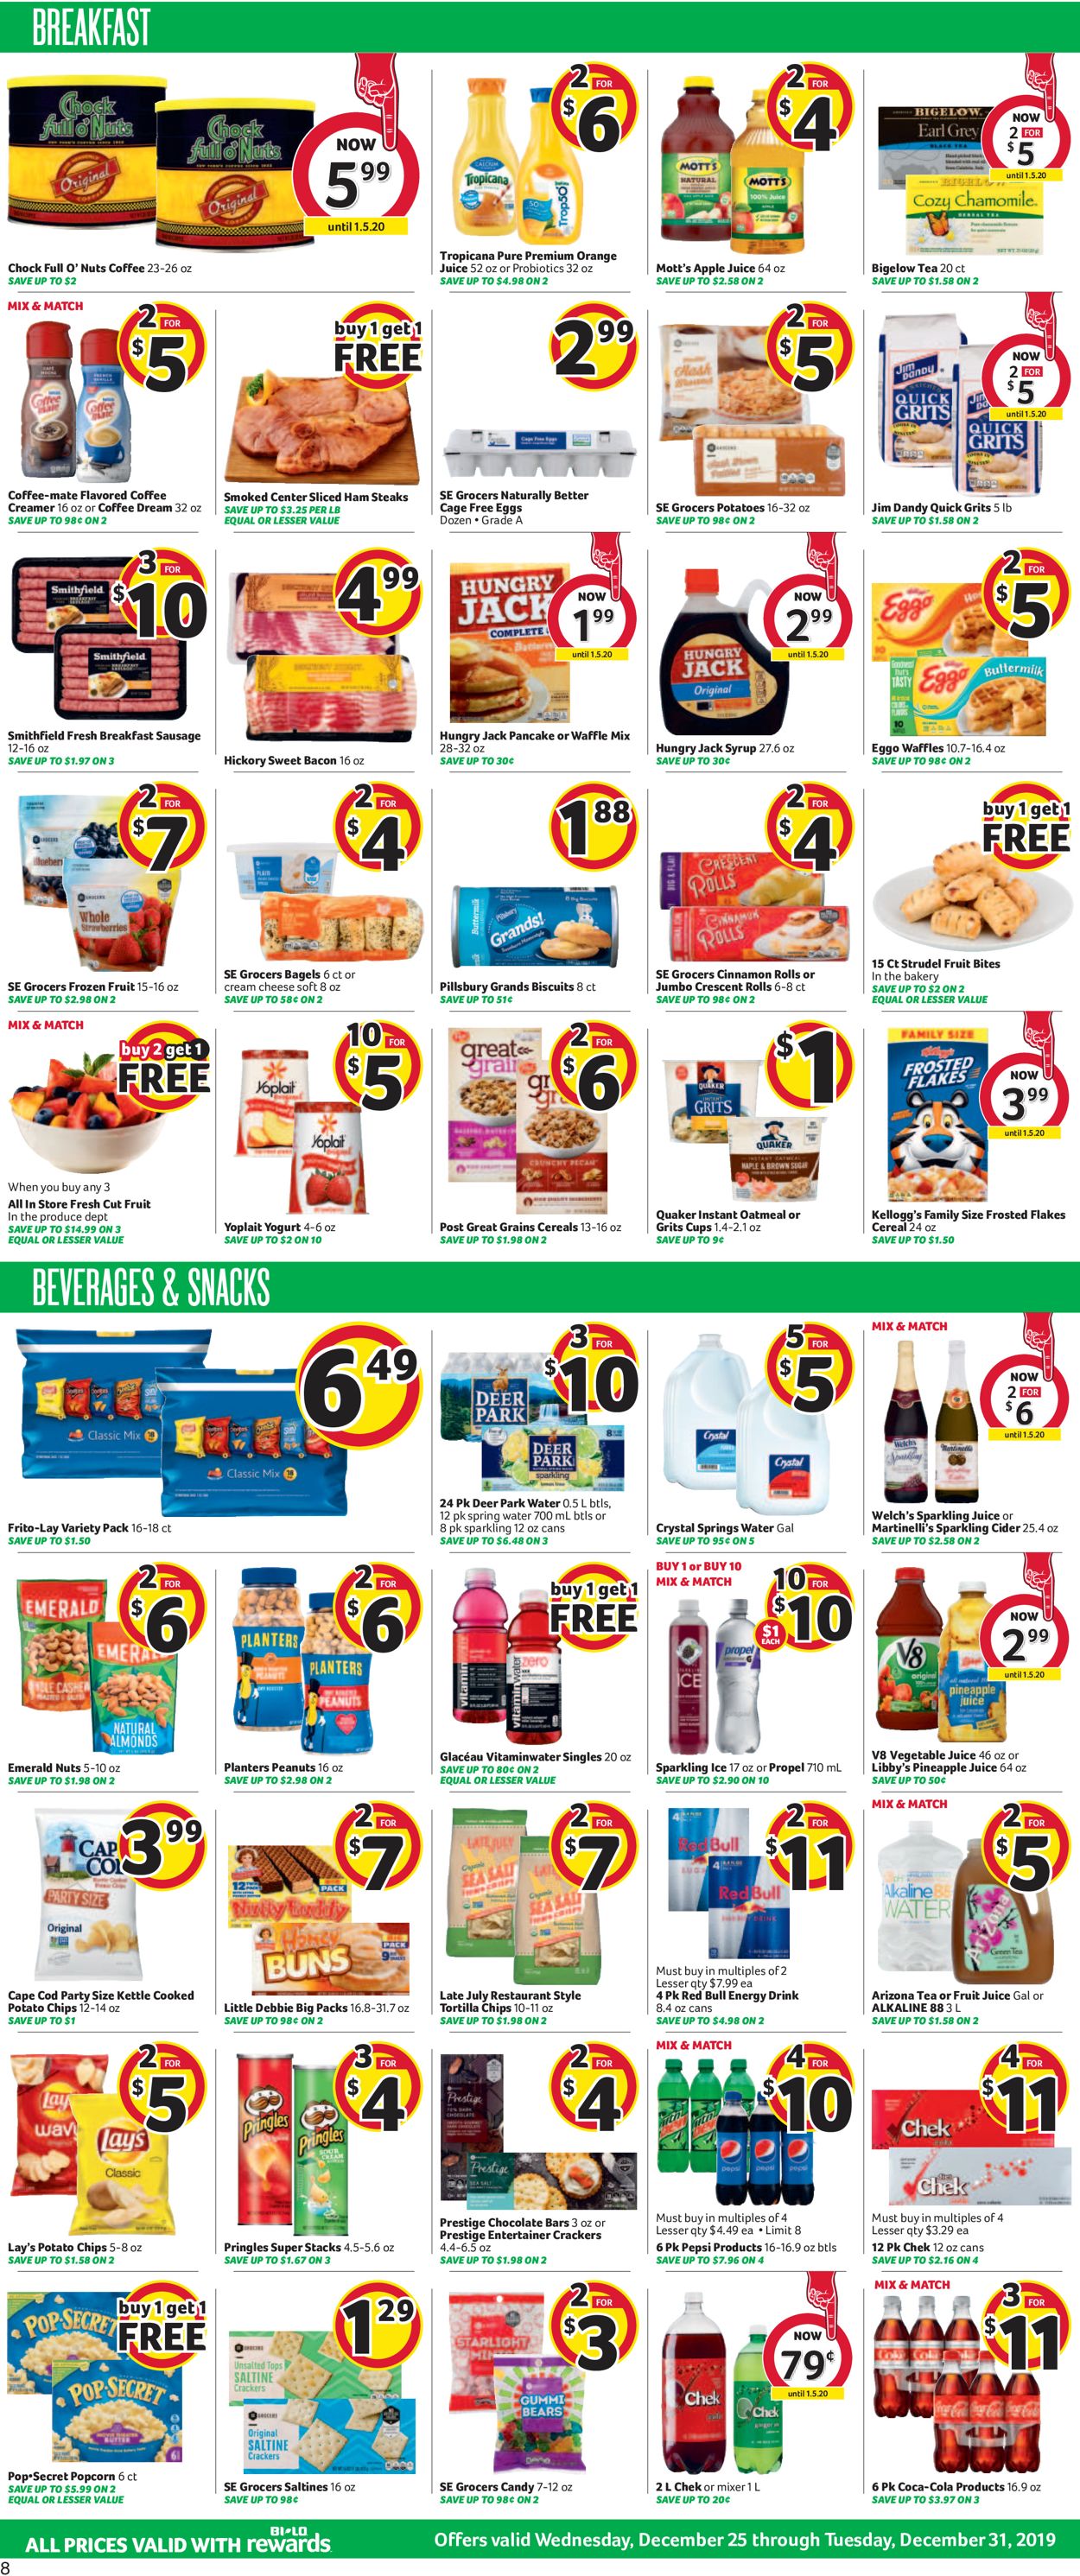 BI-LO Current weekly ad 12/25 - 12/31/2019 8 - frequent ...